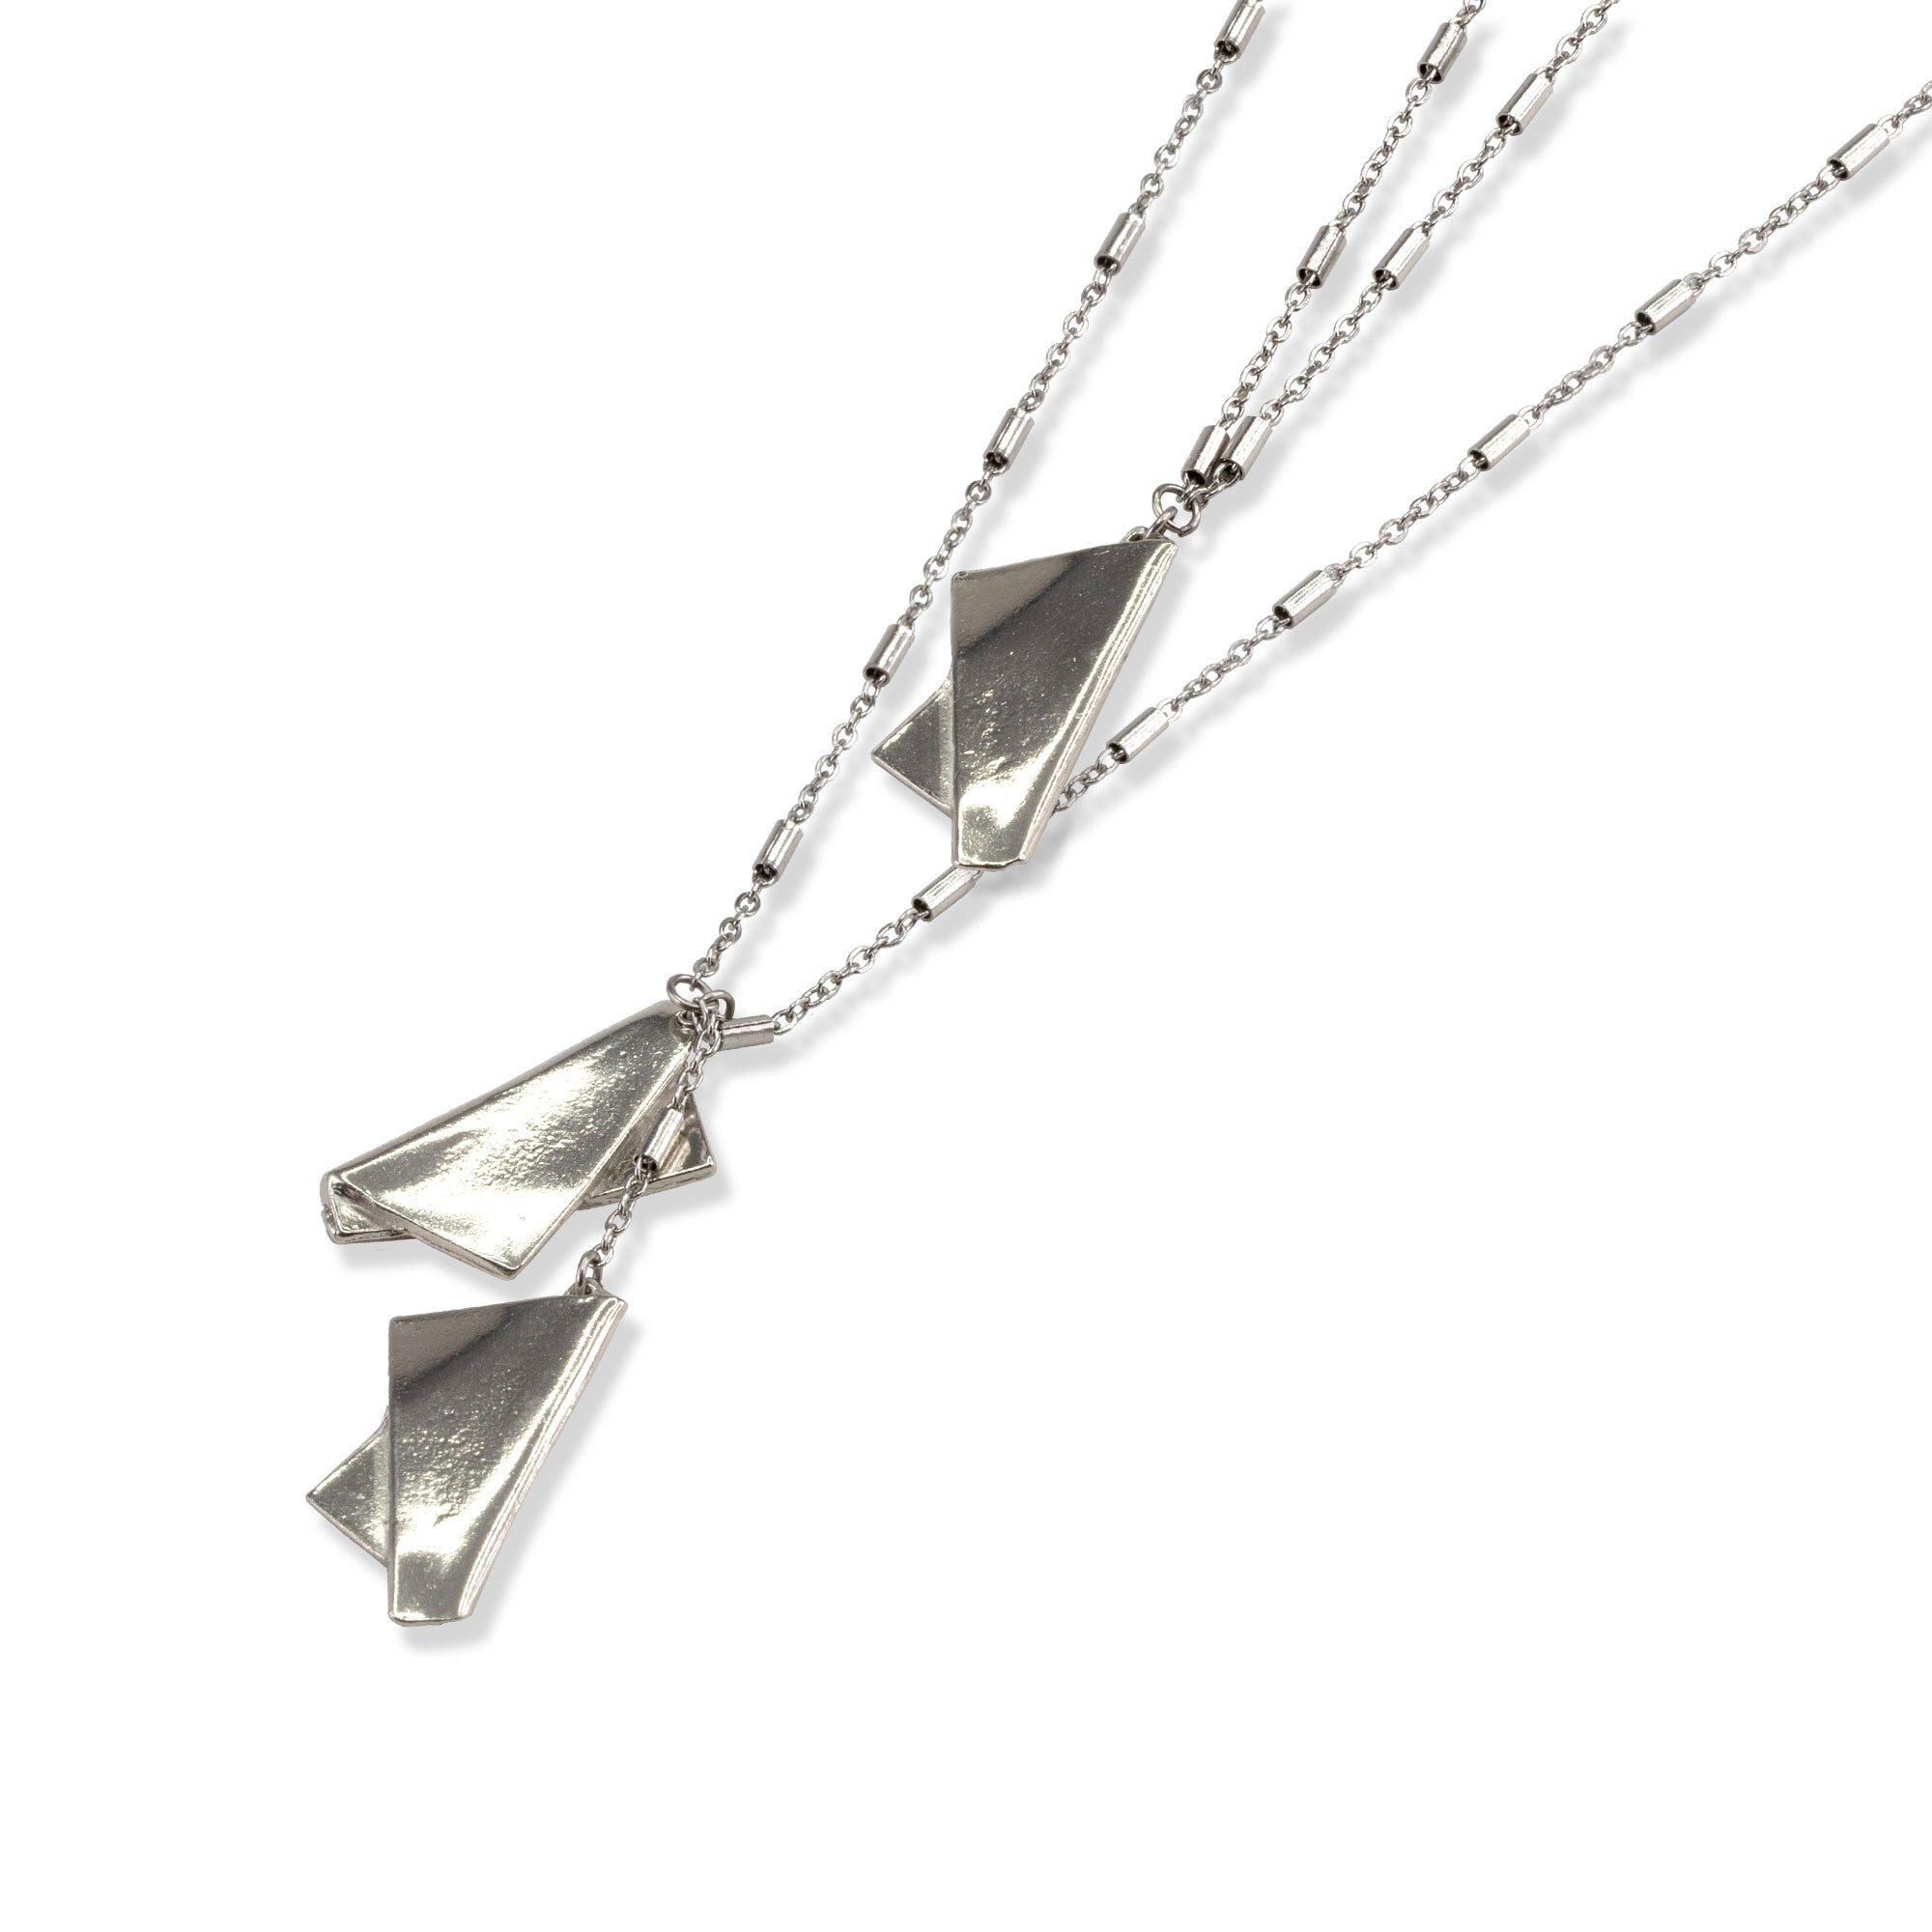 Anne-Marie Chagnon - Ganael Necklace - Pewter